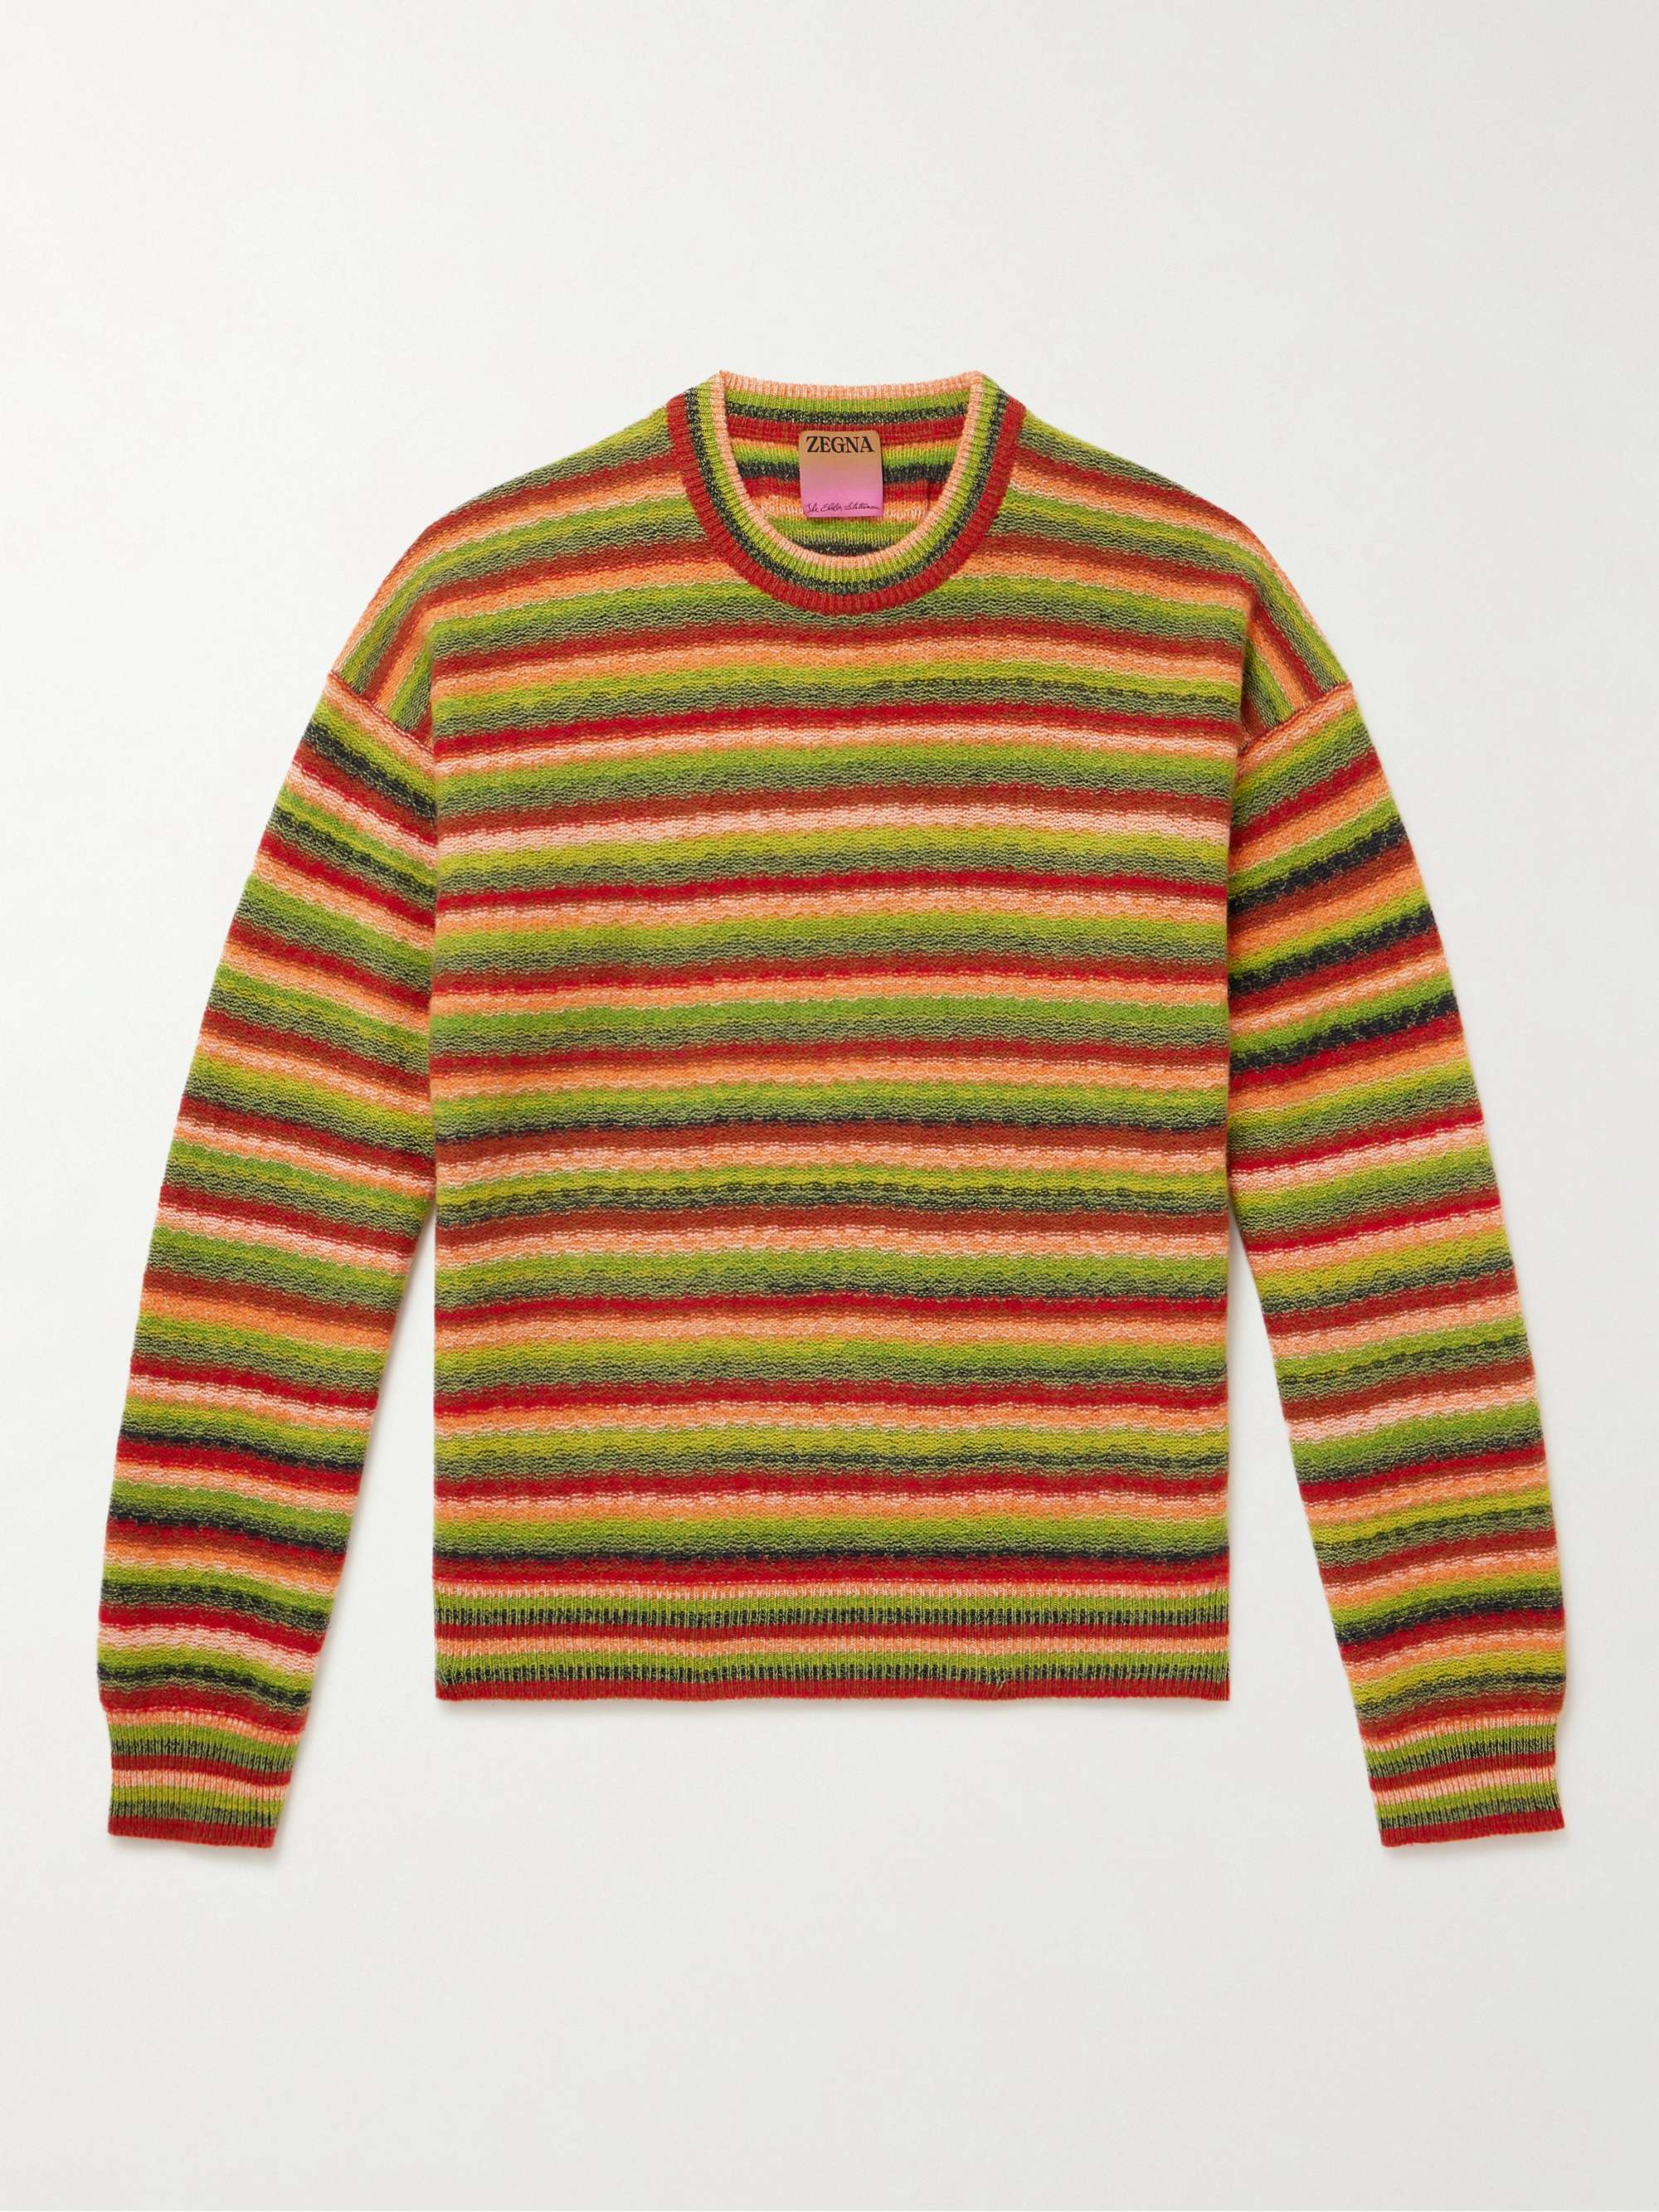 ZEGNA X THE ELDER STATESMAN Striped Oasi Cashmere and Wool-Blend ...